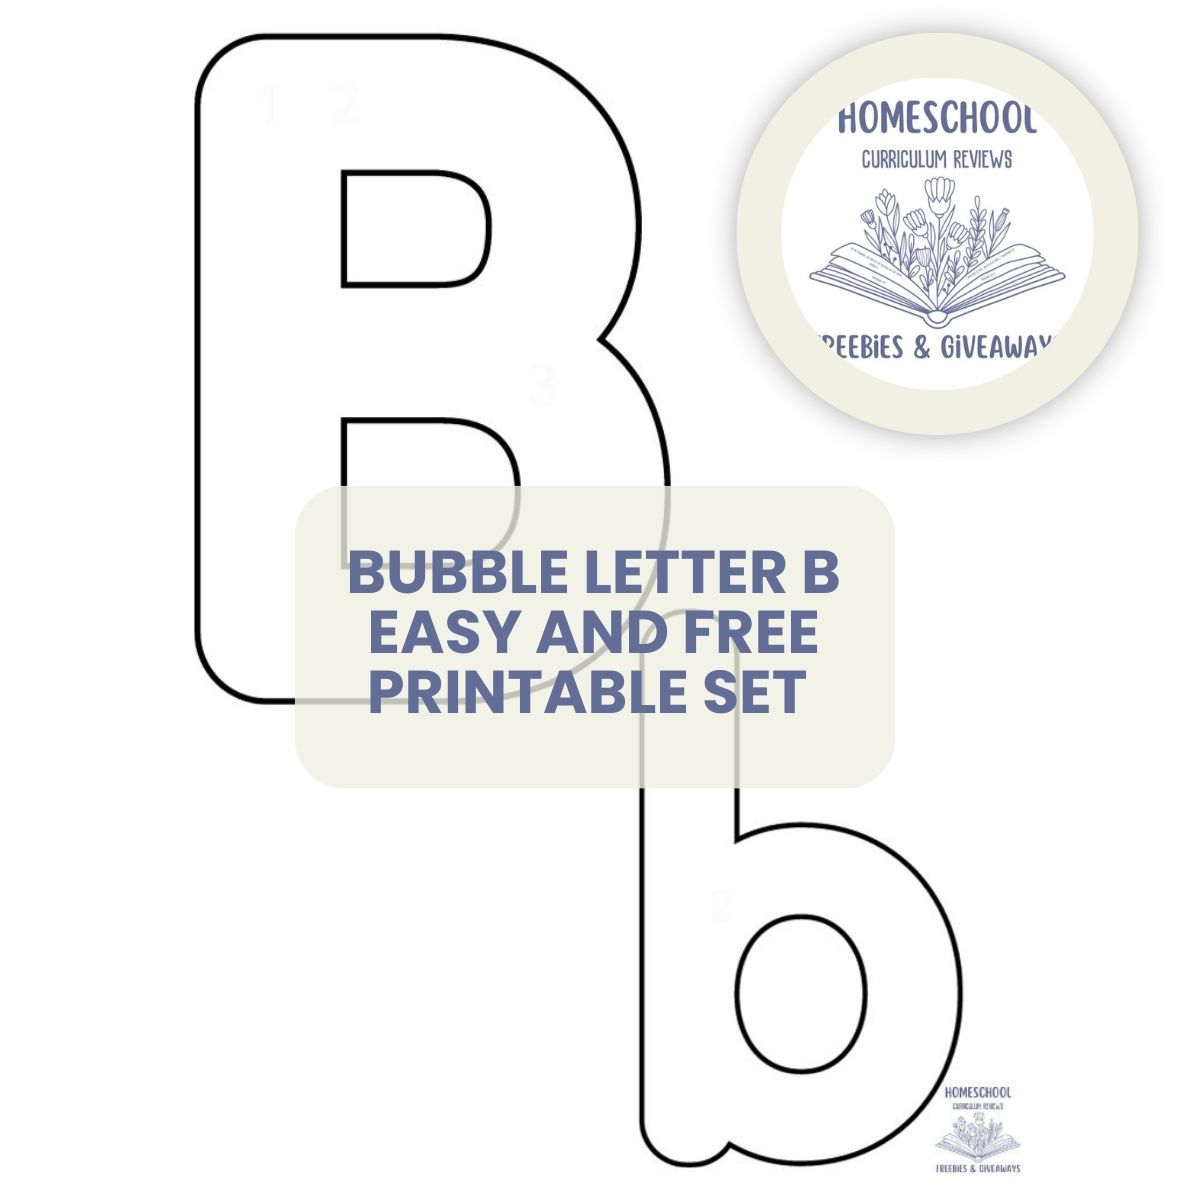 Uppercase and lowercase bubble letter b free printable from Homeschool Freebies and Giveaways with words Bubble letter B easy and free printable set